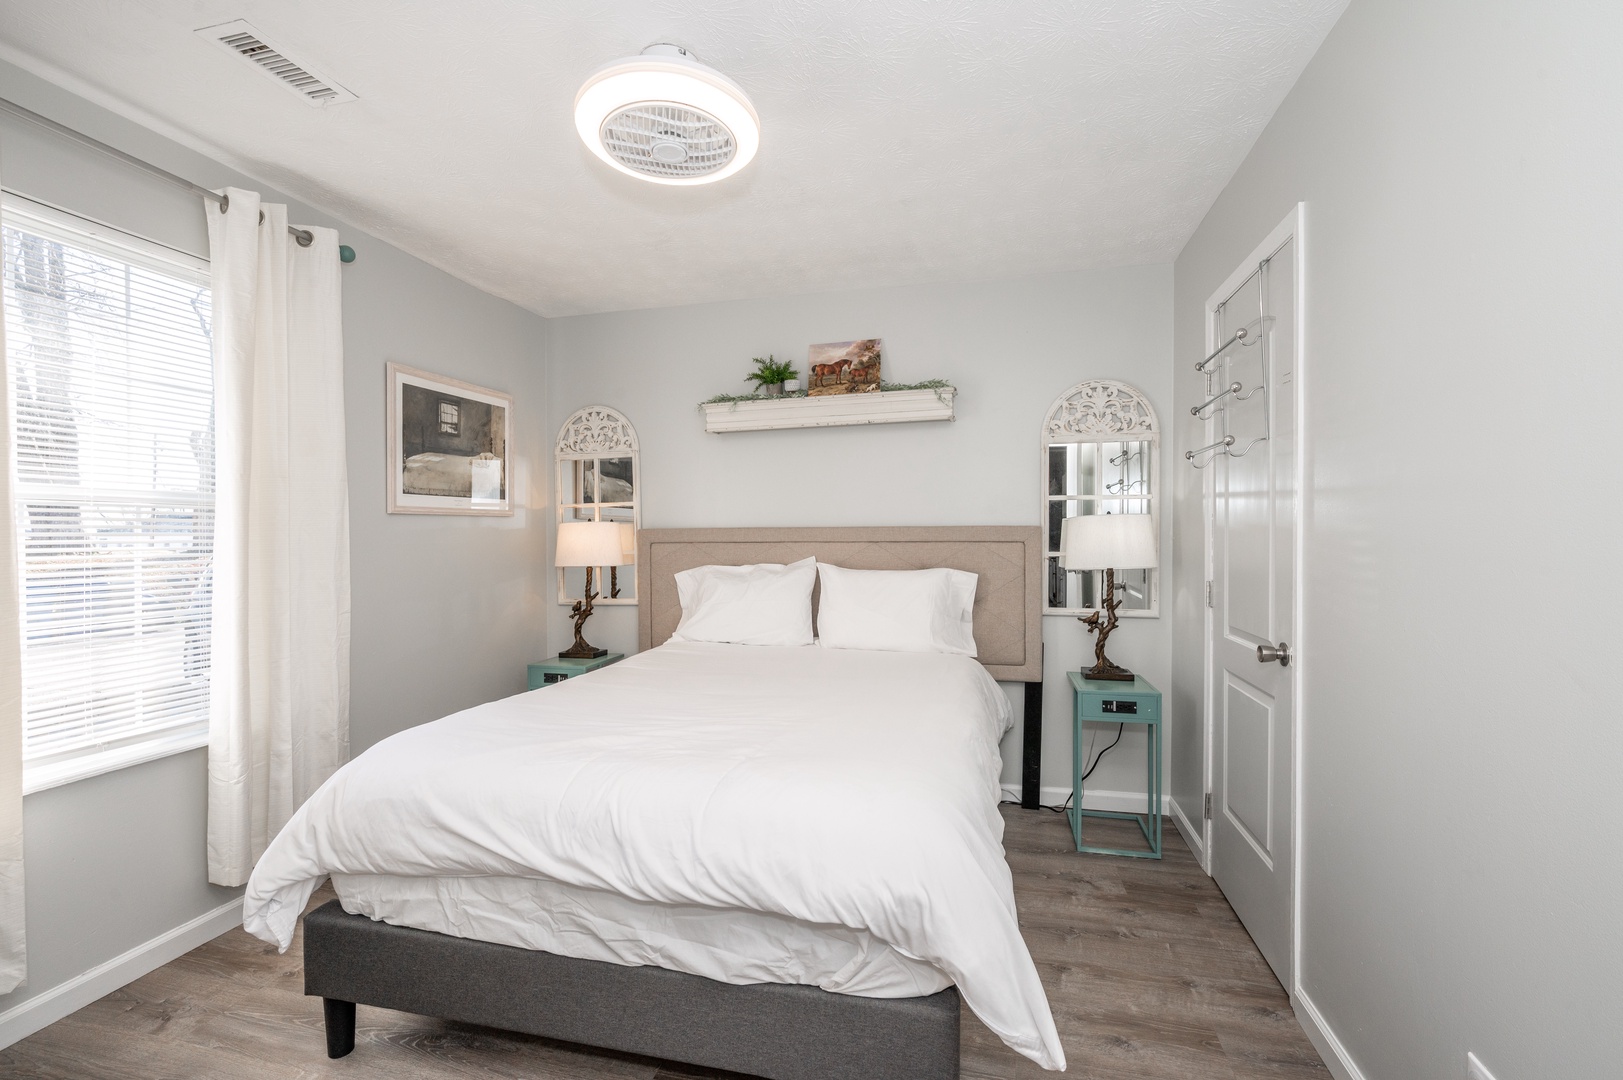 This serene bedroom retreat features a plush queen bed & Smart TV